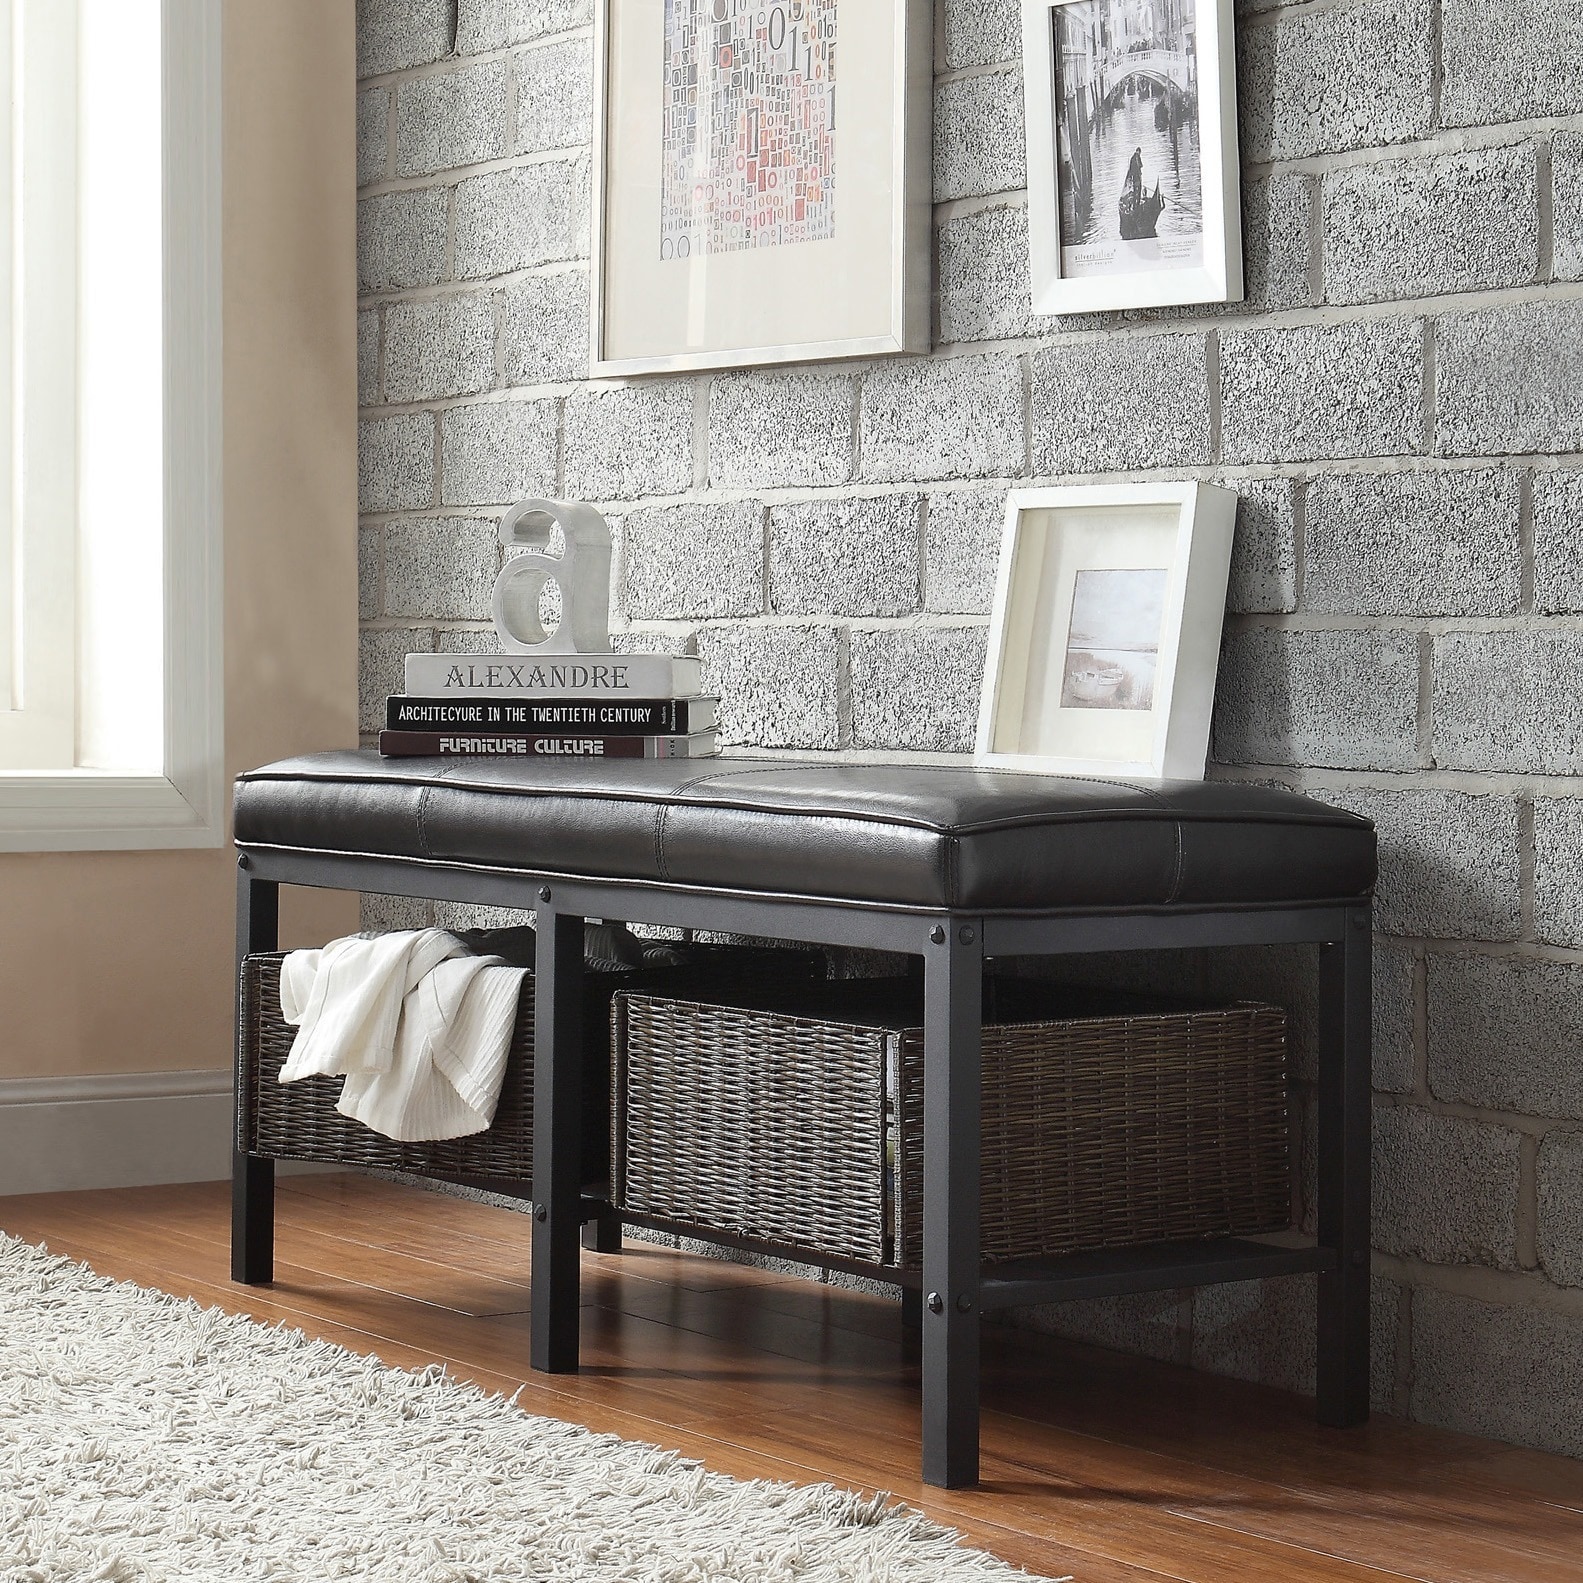 Myra Ii Black Faux Leather Upholstered Modern Rustic Bench